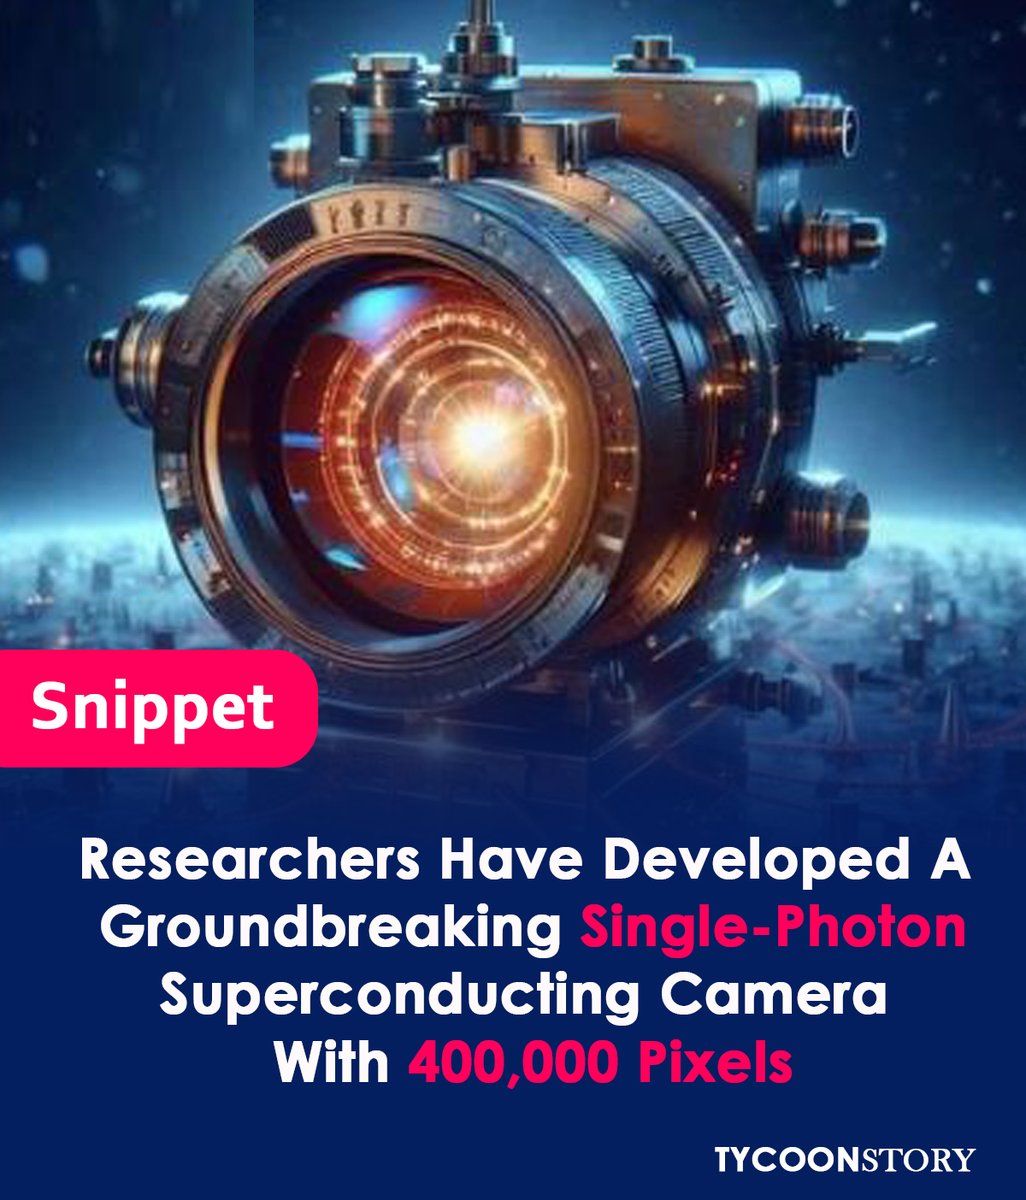 A Superconducting Camera With 400,000 Pixels Has Been Created By Researchers.
#SuperconductingCamera #QuantumImaging  #PixelTechnology #Superconductors #CameraInnovation #TechBreakthrough #ImagingTechnology #ResearchInnovation  #technology #pictures #development #pixel